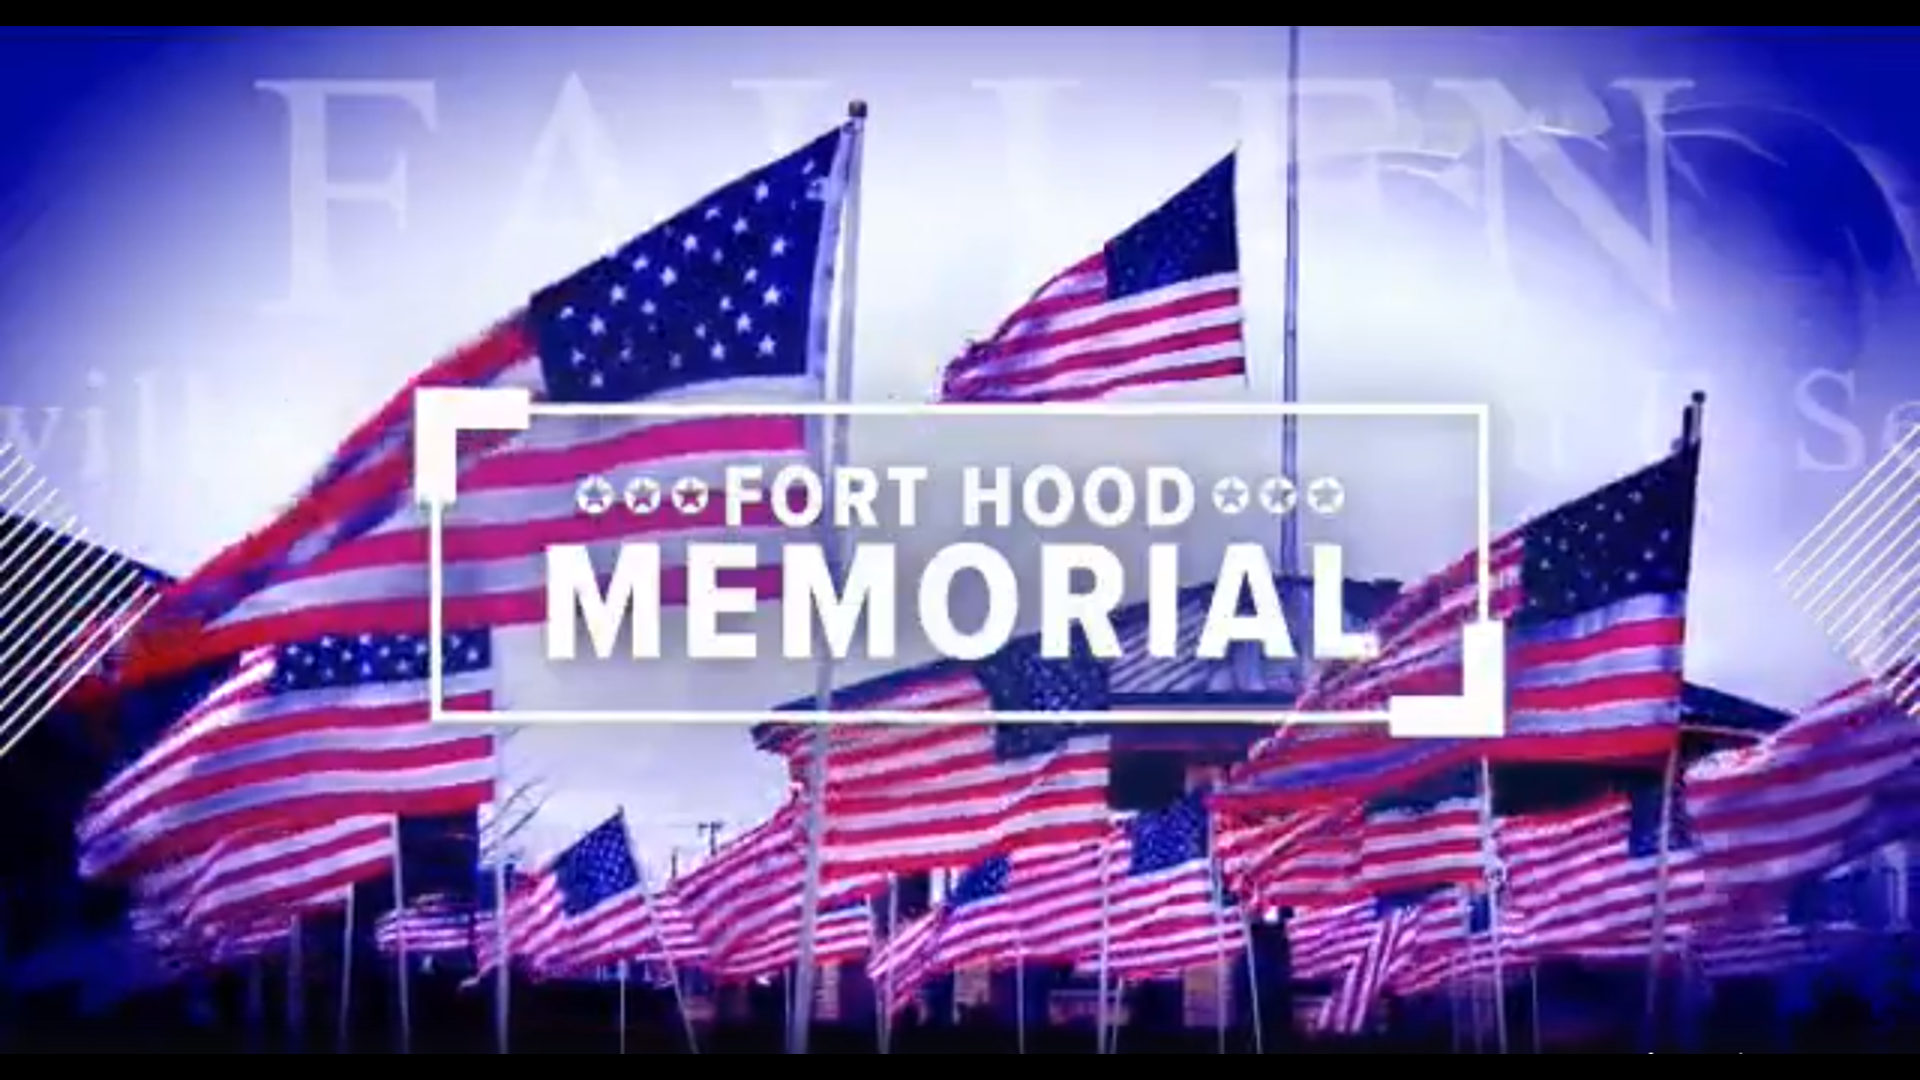 The mass shooting on Ft. Hood on Nov. 5, 2009 was the worst domestic terrorist attack on a military installation.